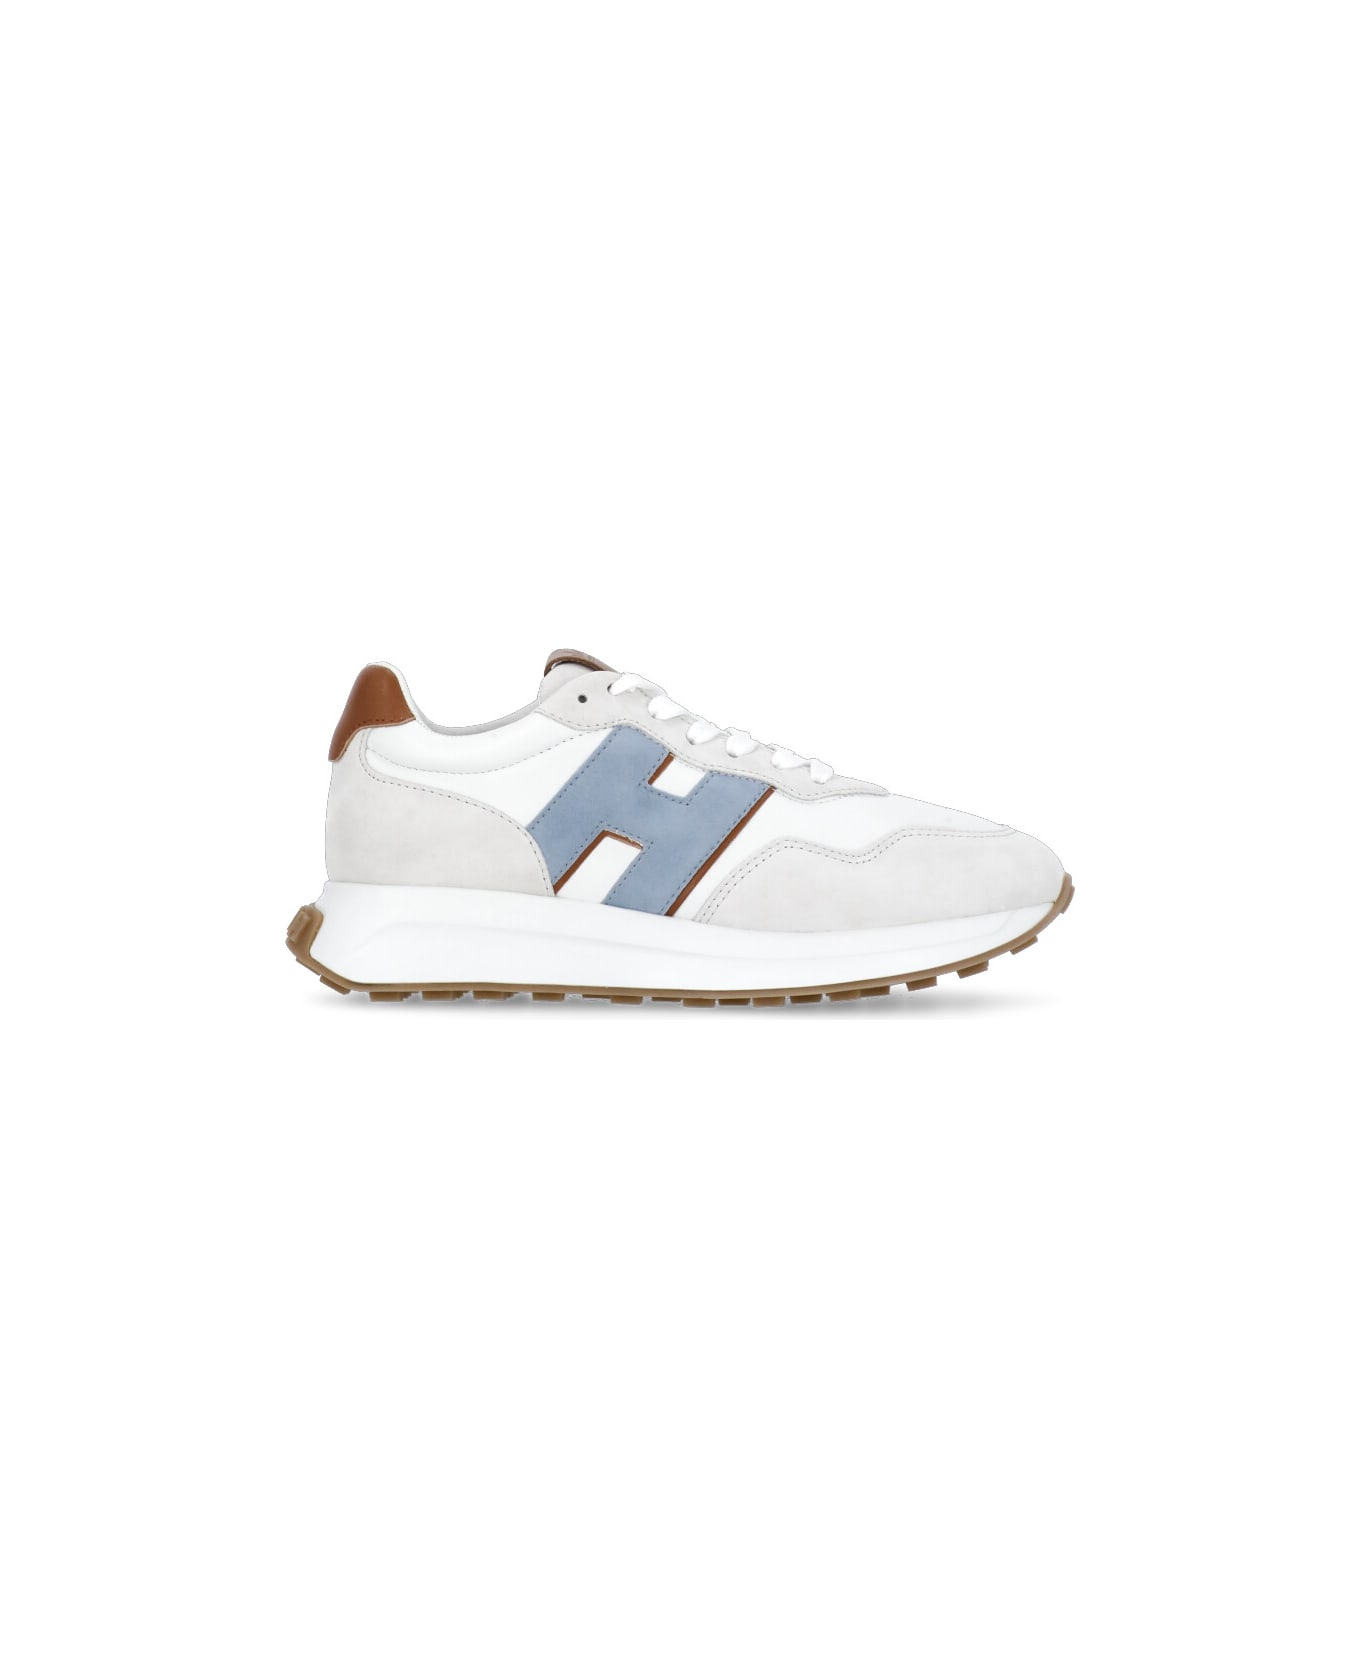 Hogan H641 Laced H Patch Sneakers - White スニーカー